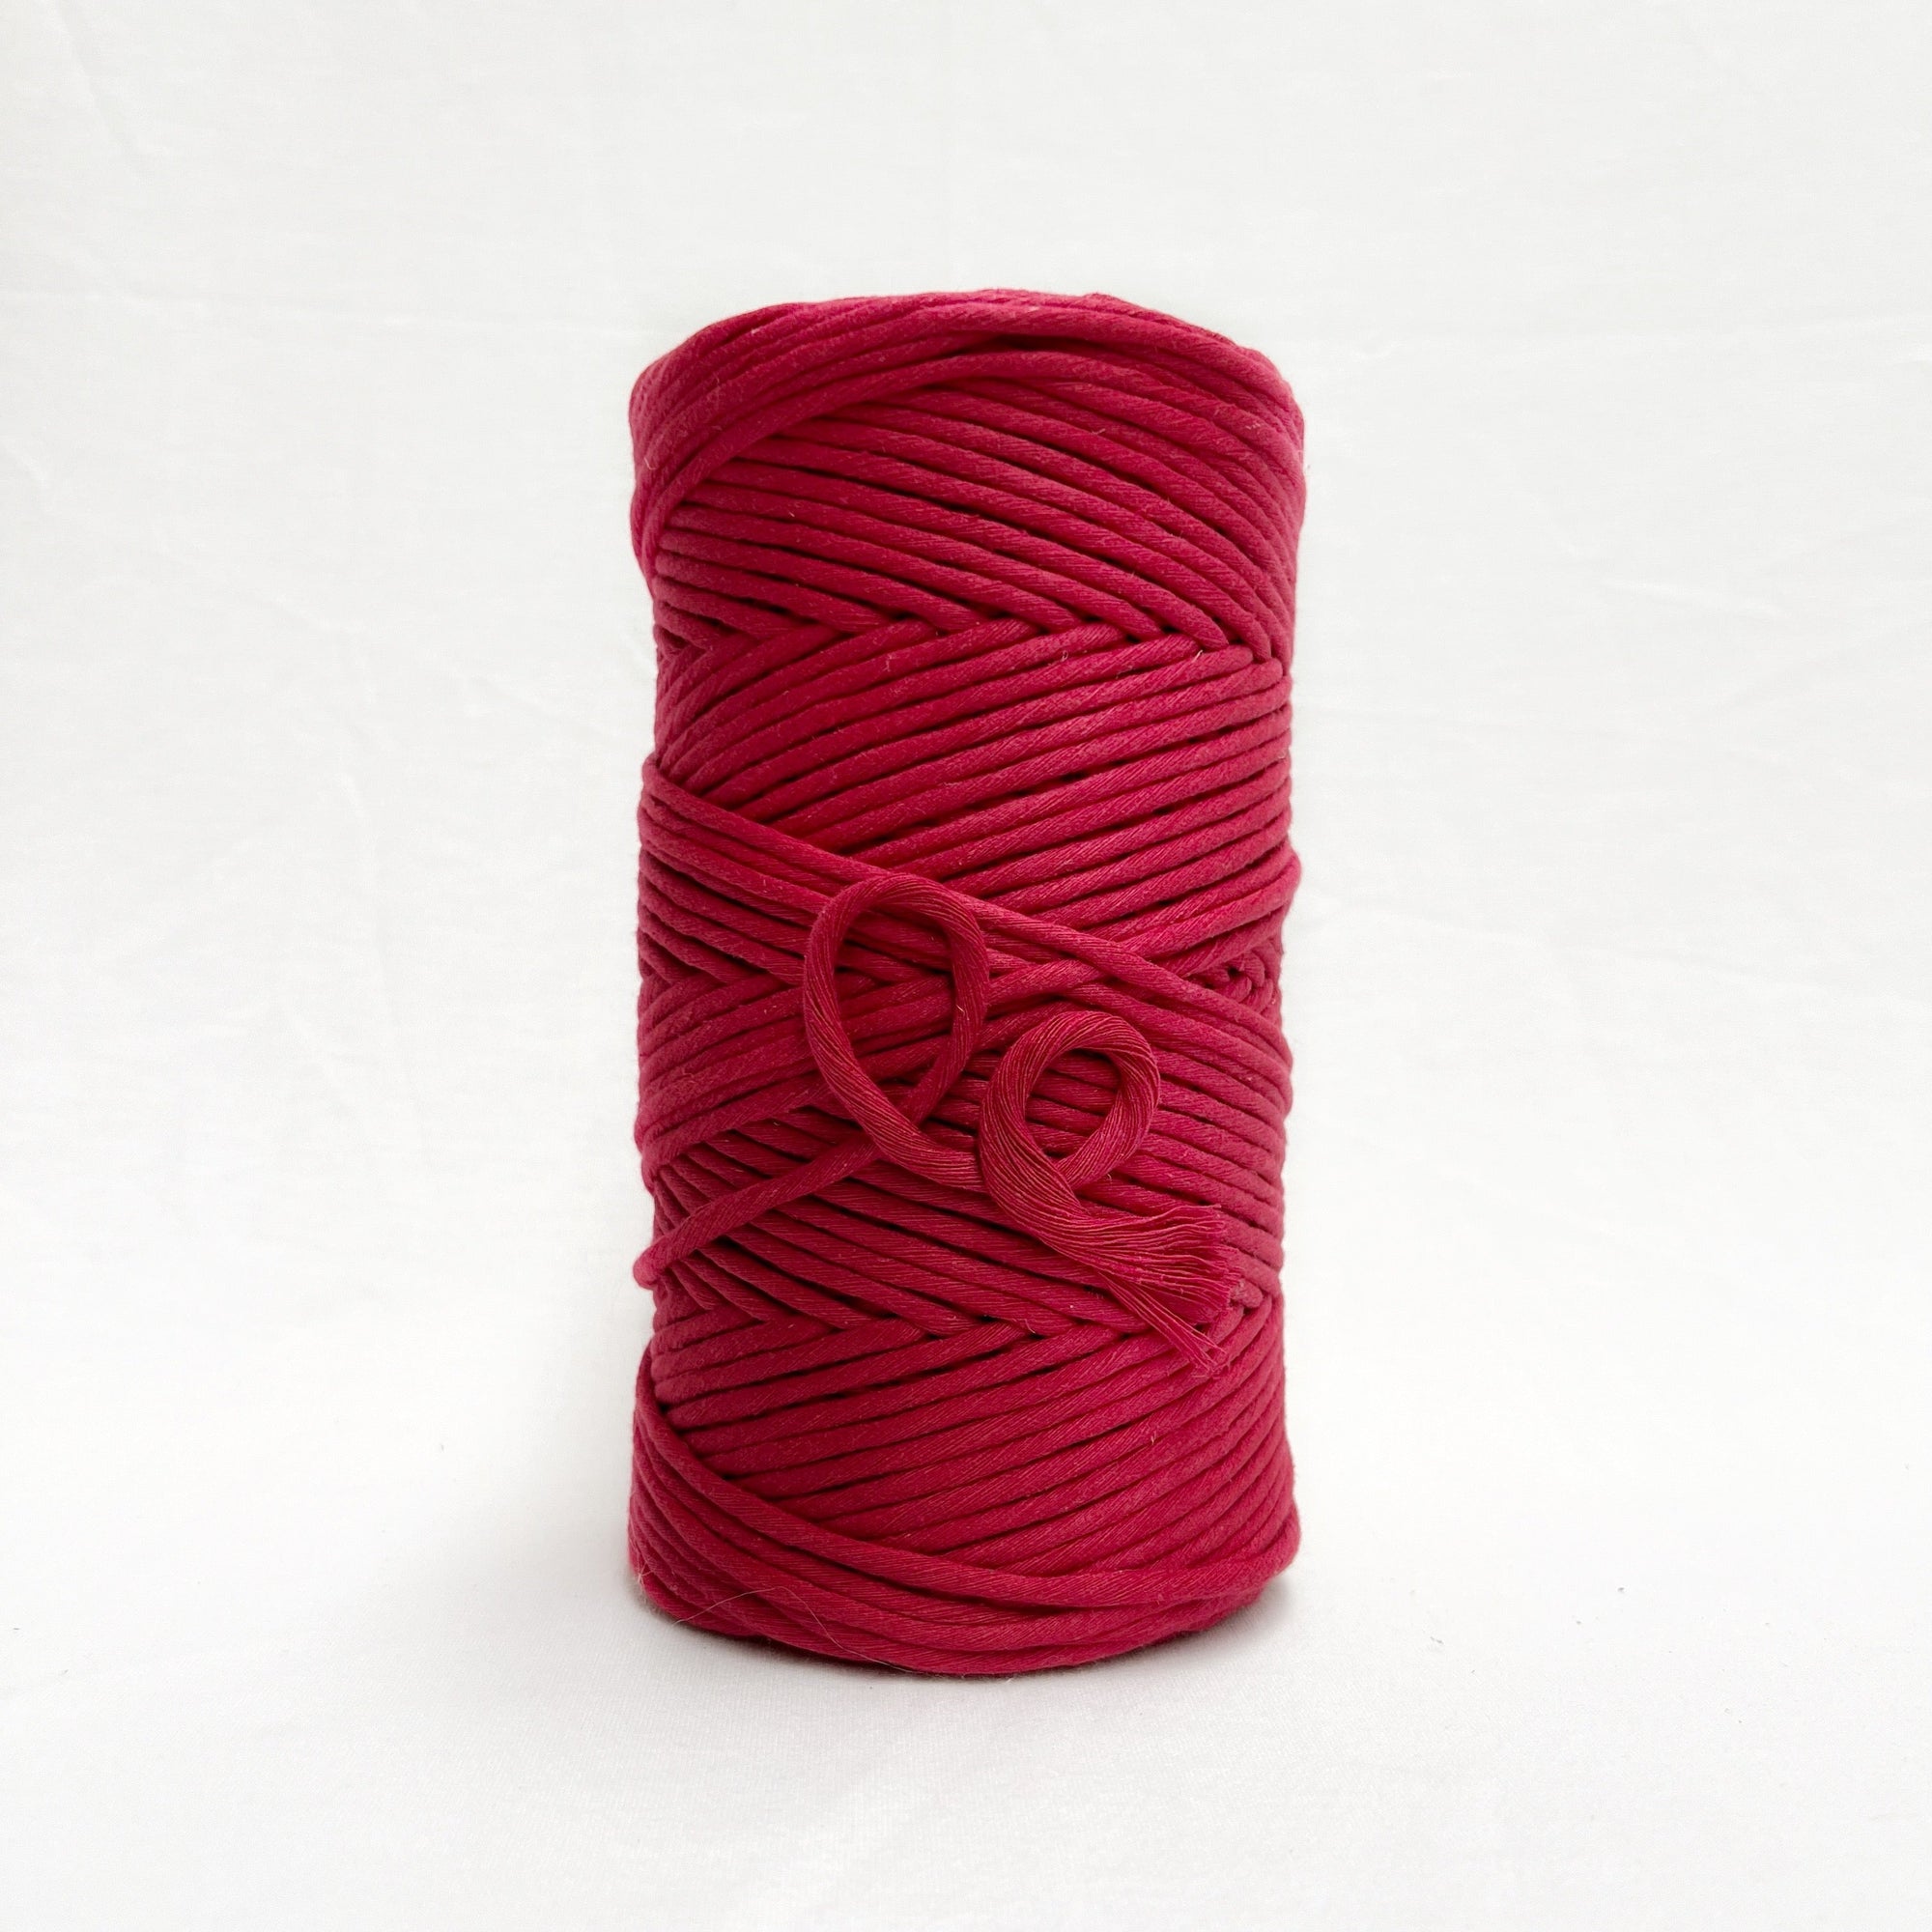 mary maker studio 1kg 5mm recycled cotton macrame string in vibrant chilli red colour buy online for macrame workshops beginners and advanced artists